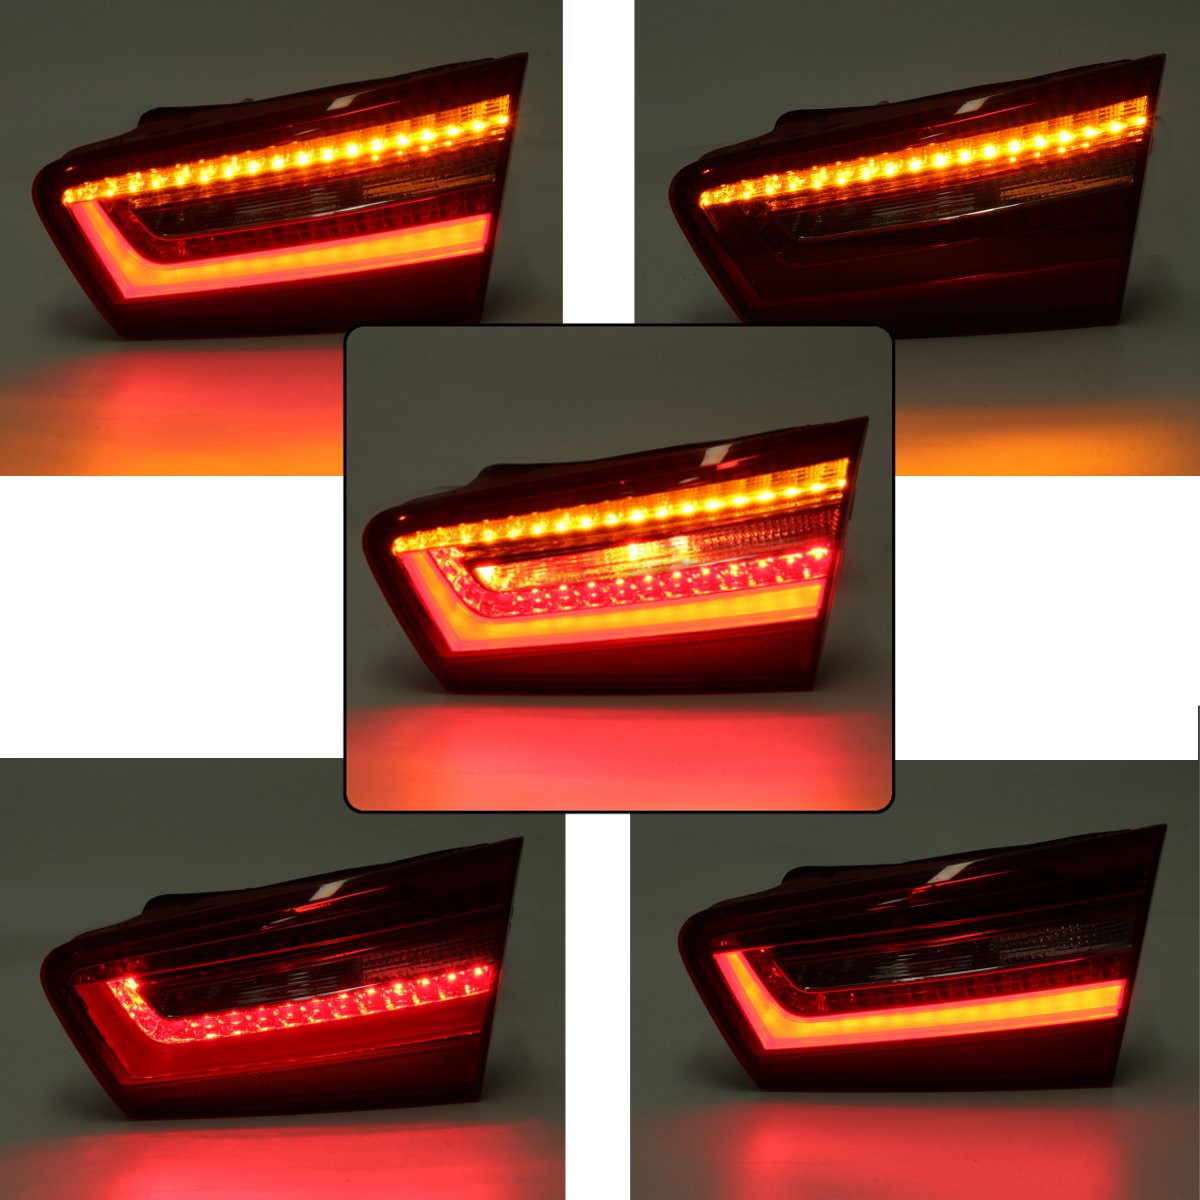 Tomato Car LED Rear Inner Tail Light Brake Lamp with Bulb Wiring Harness for Audi A6 C7 2010-2016 Saloon 4GD945093 4GD945094